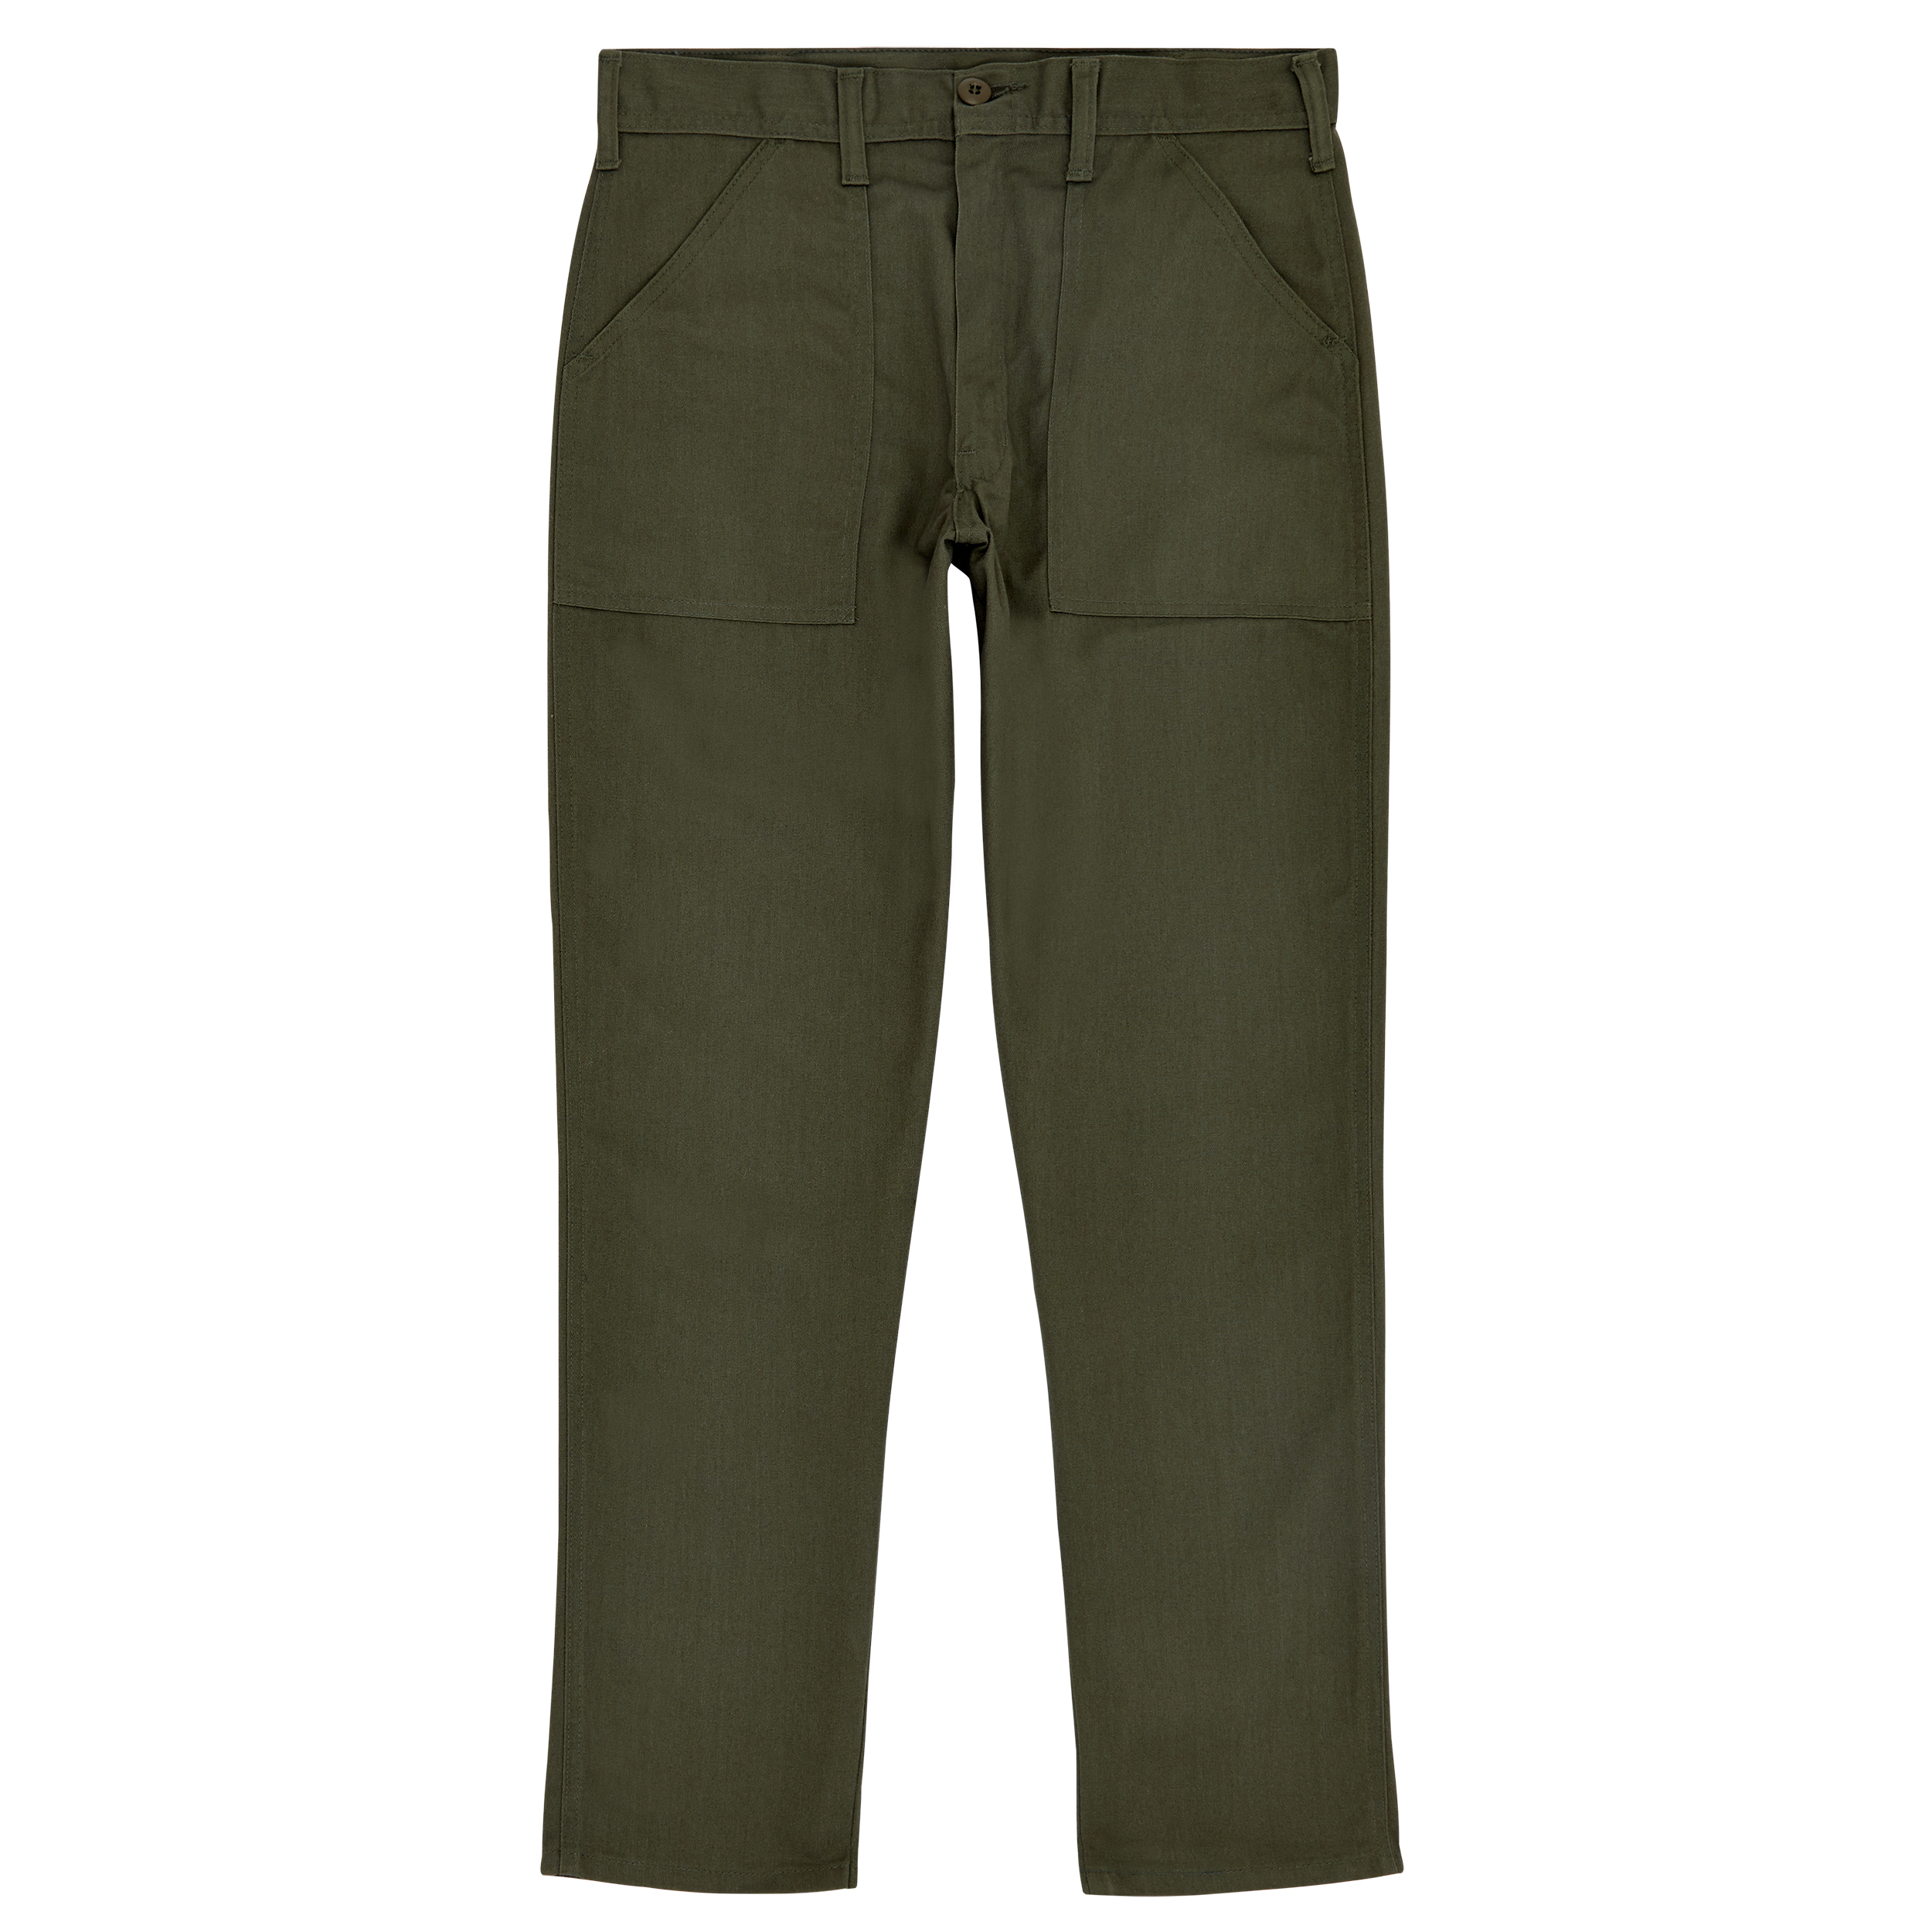 Stan Ray trousers at Urban Outfitters £65 or 85 euros